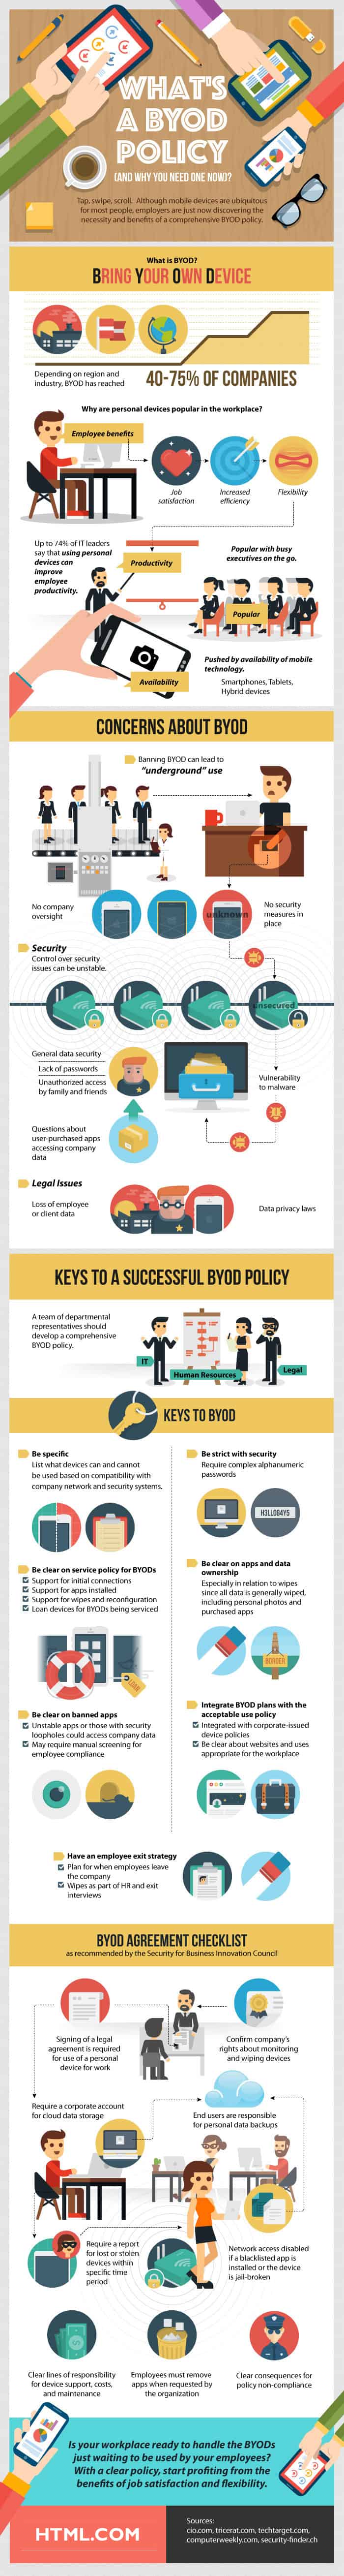 BYOD Policy infographic